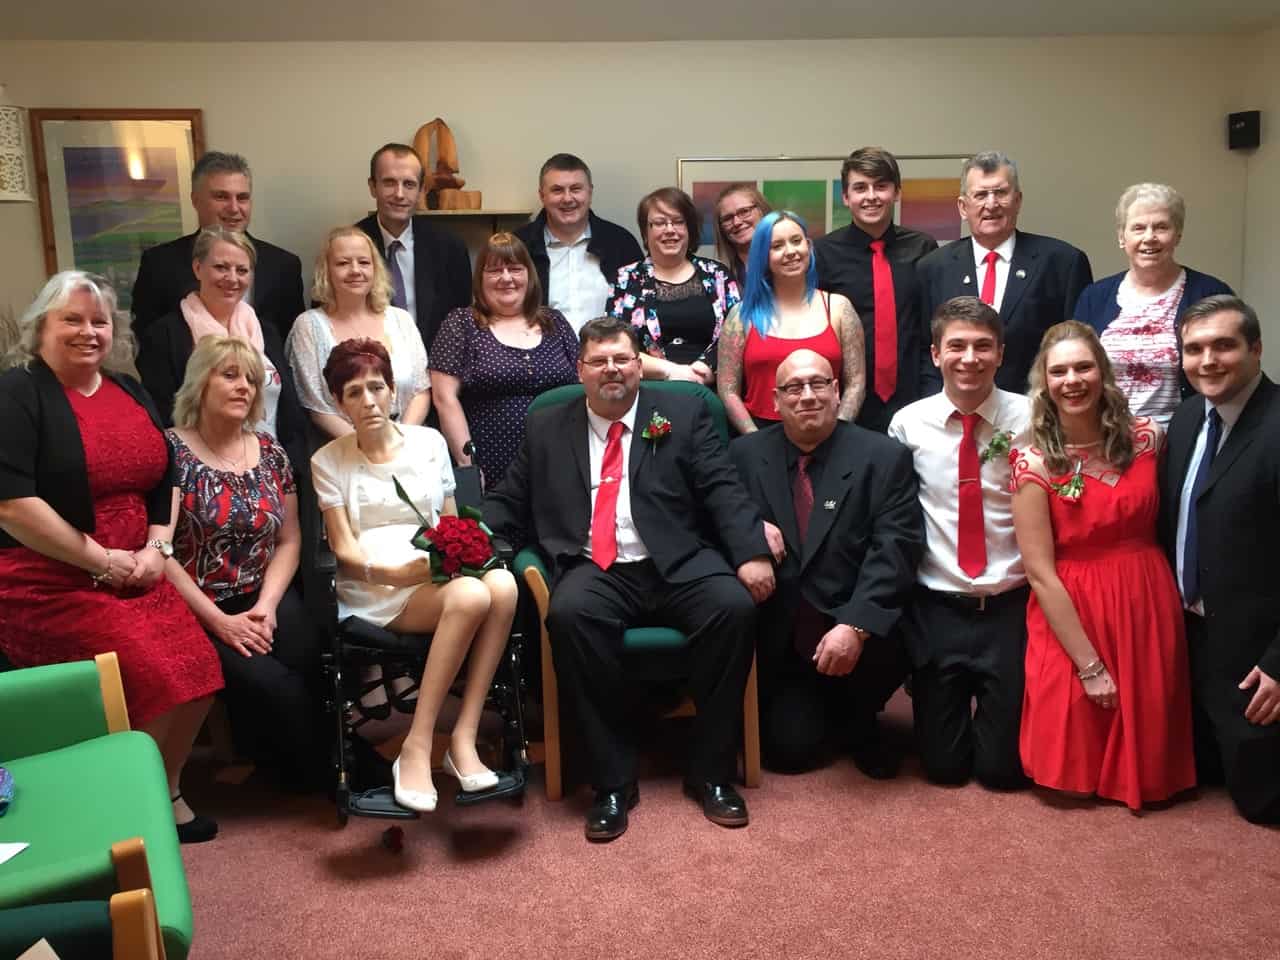 Family photo at the renewal of vows between Lisa and Paul. Led by hospice chaplain Karen Murphy.